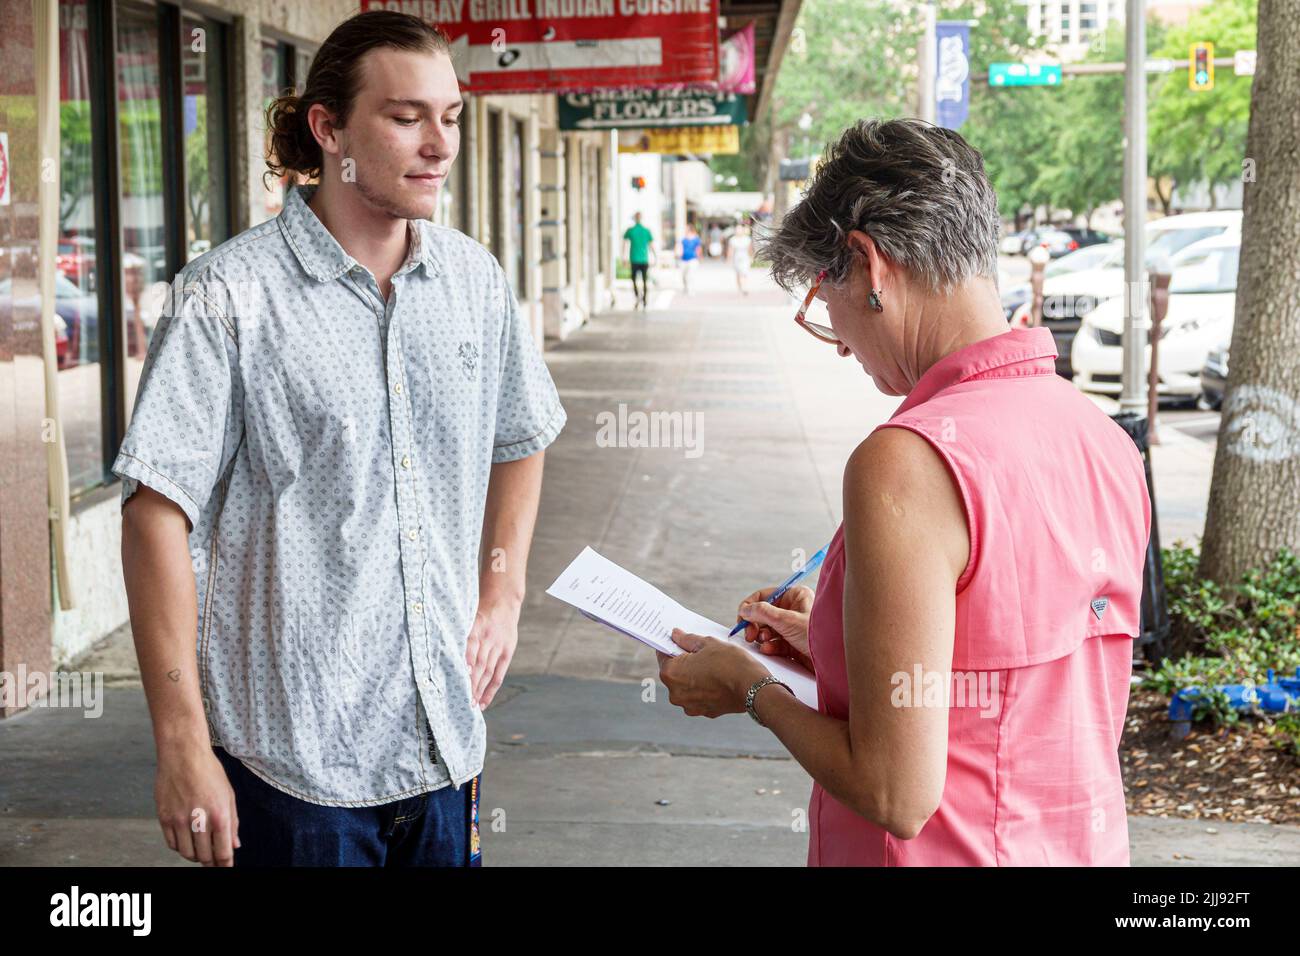 St. Saint Petersburg Florida,Central Avenue,survey petition questionnaire opinion poll,adults woman female man male,asking questions street sidewalk Stock Photo